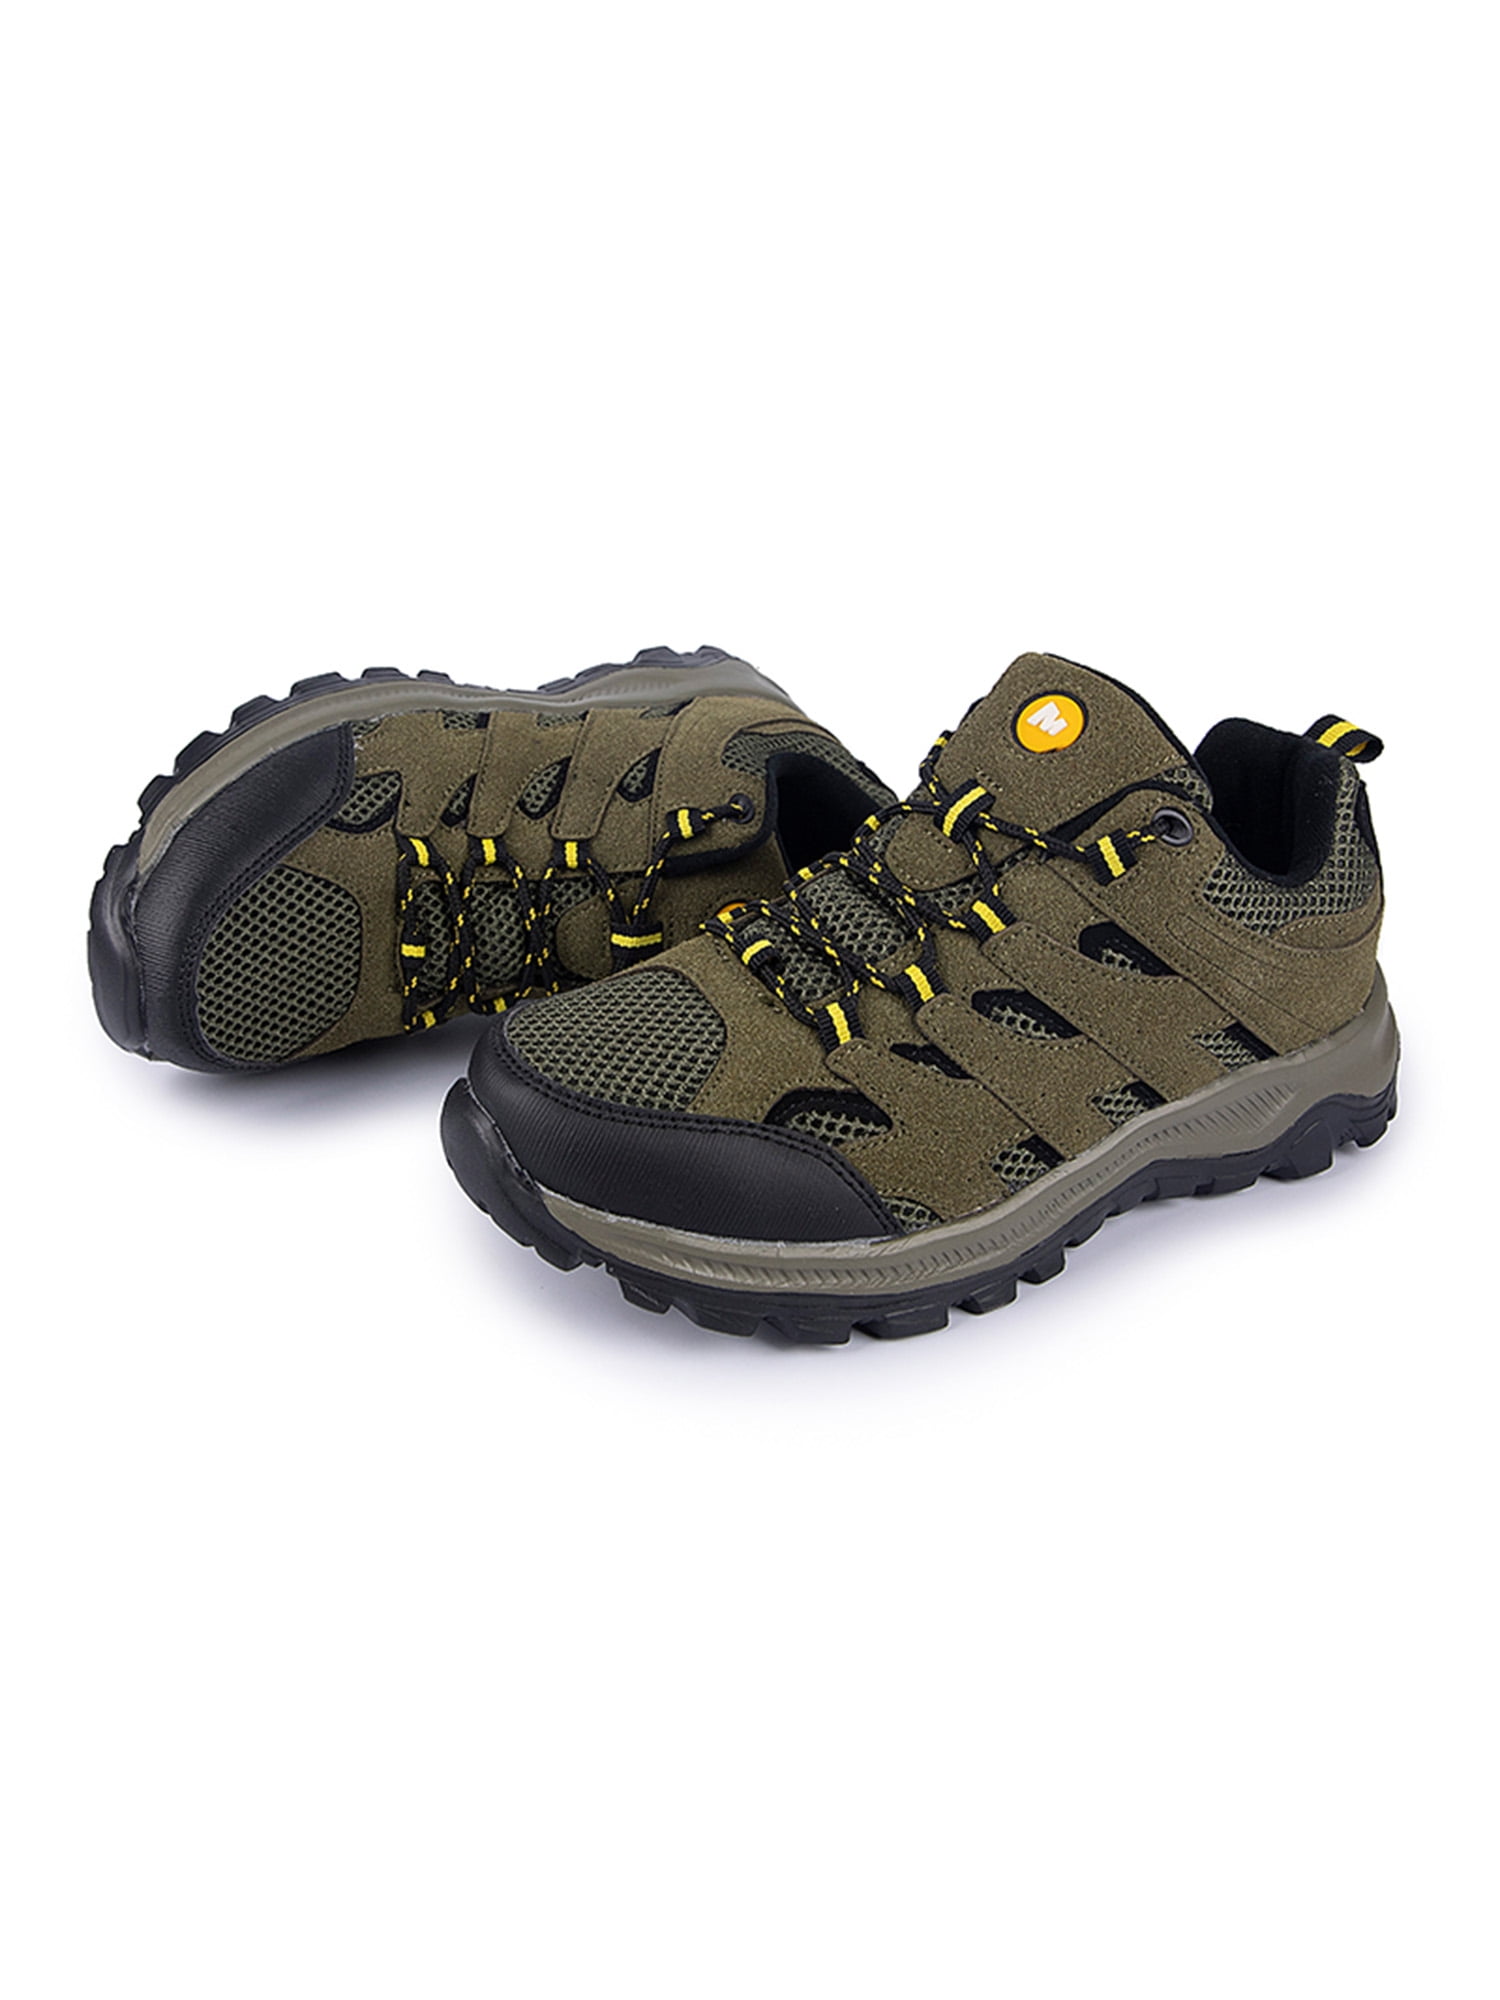 MENS HIKING BOOTS NEW WALKING ANKLE LACEUP SLIP ON TRAIL TREKKING TRAINERS SHOES 